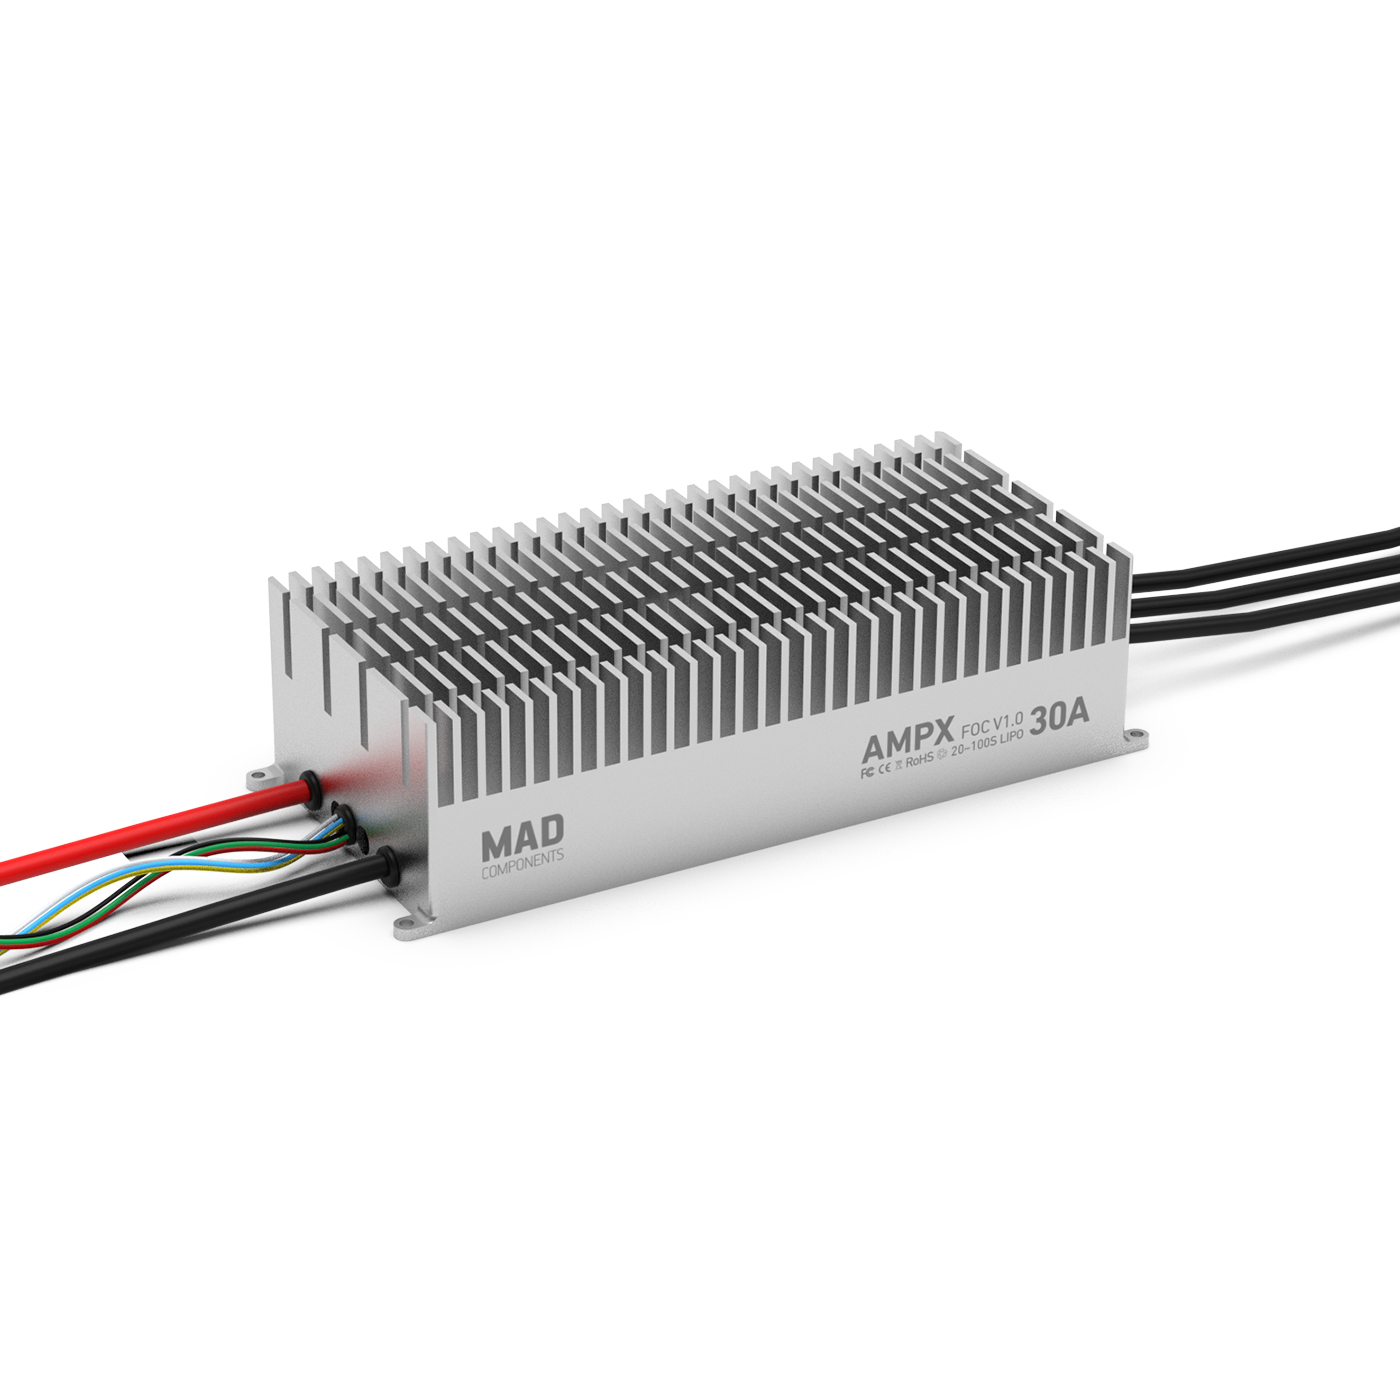 MAD AMPX FOC 30A 80~440V ESC for delivery heavey multirotor